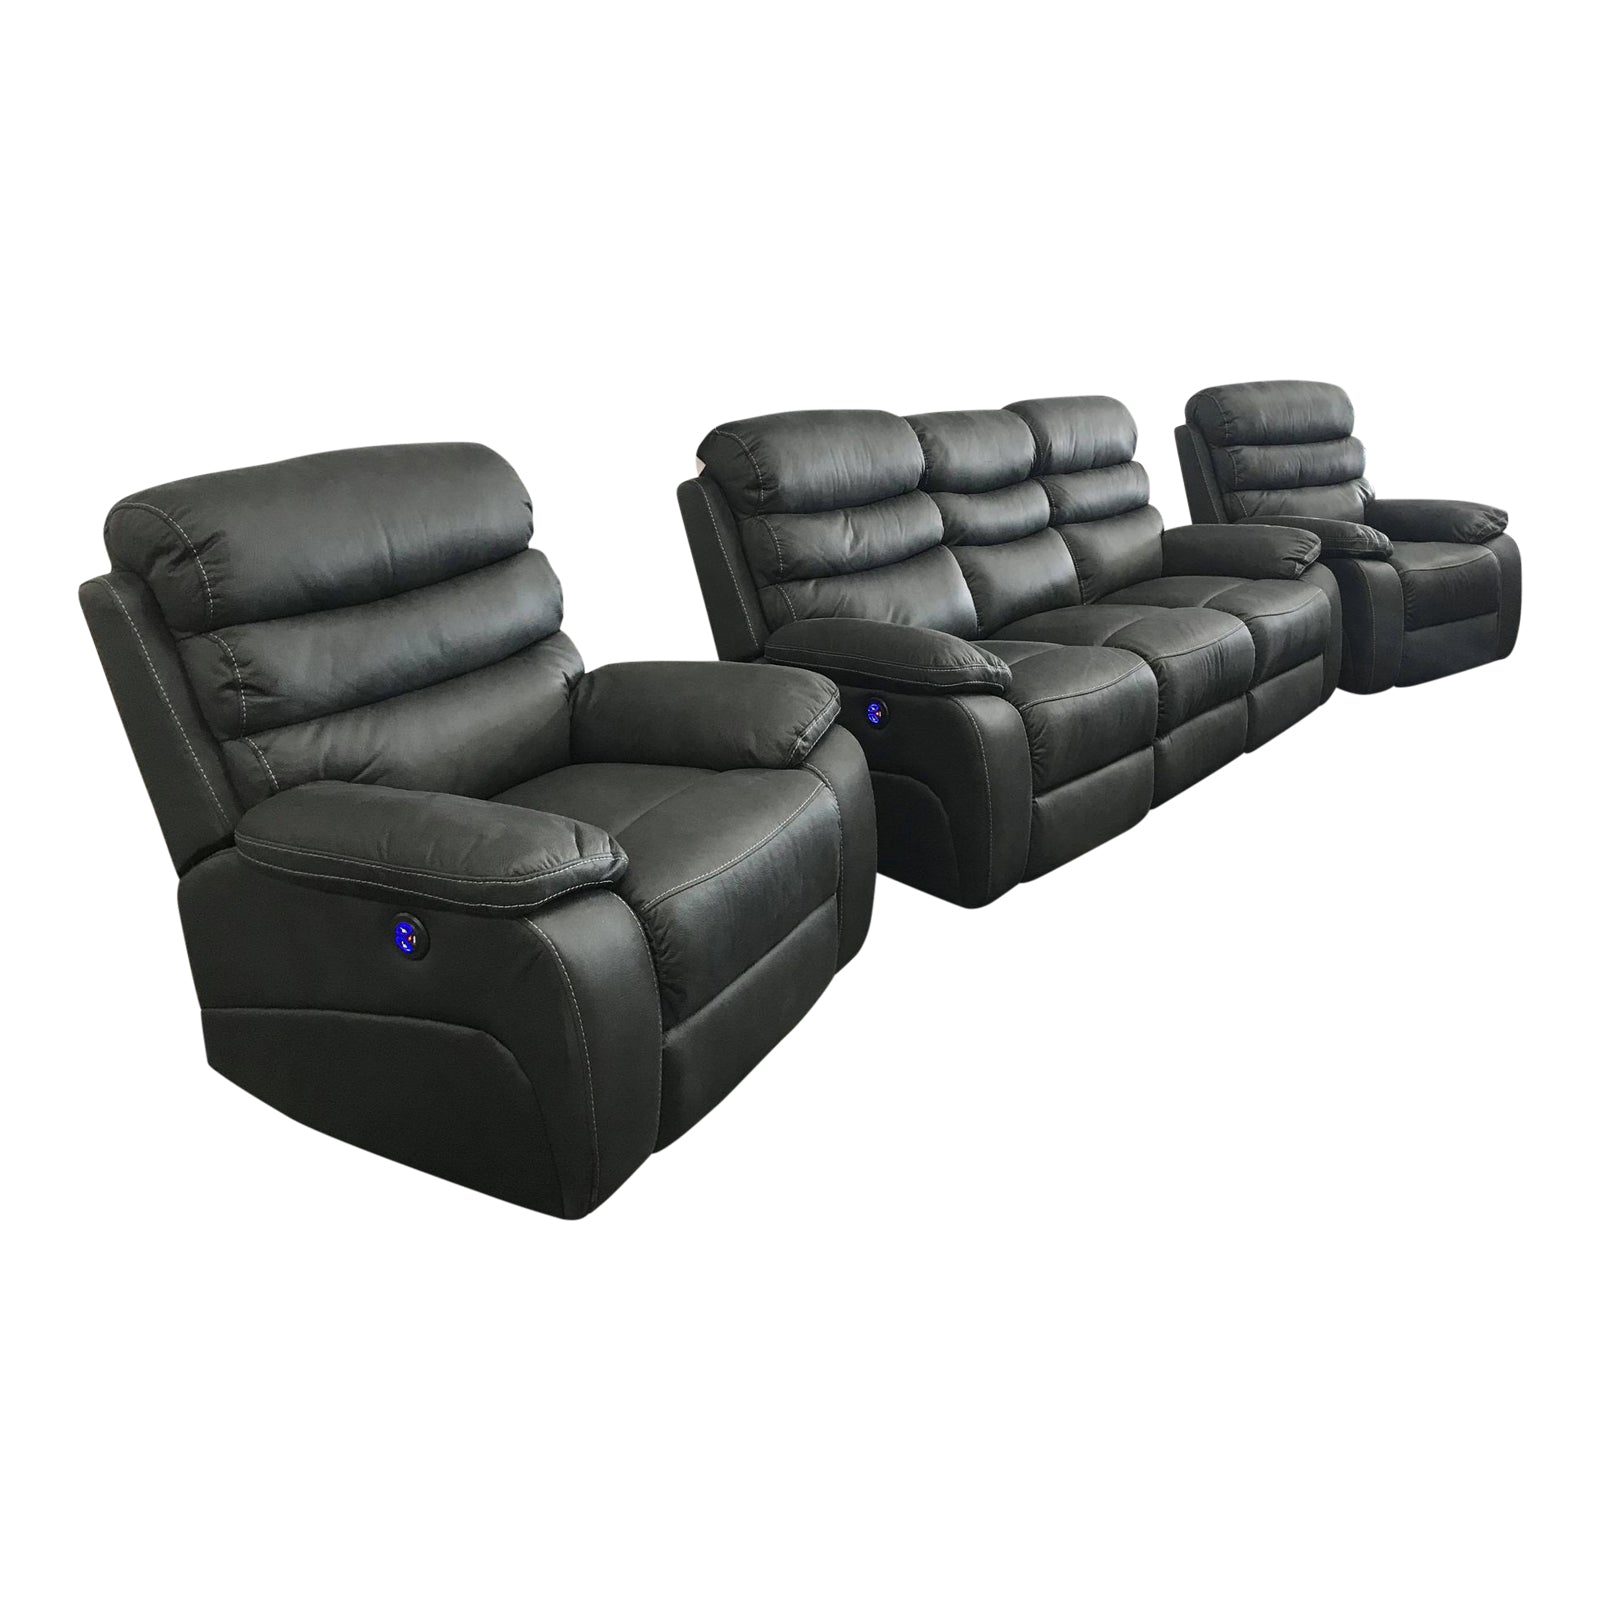 3RR+1RR+1RR Leatherette Grey Electric Recliner Feature Multi Positions Ultra Cushioned USB Outlets